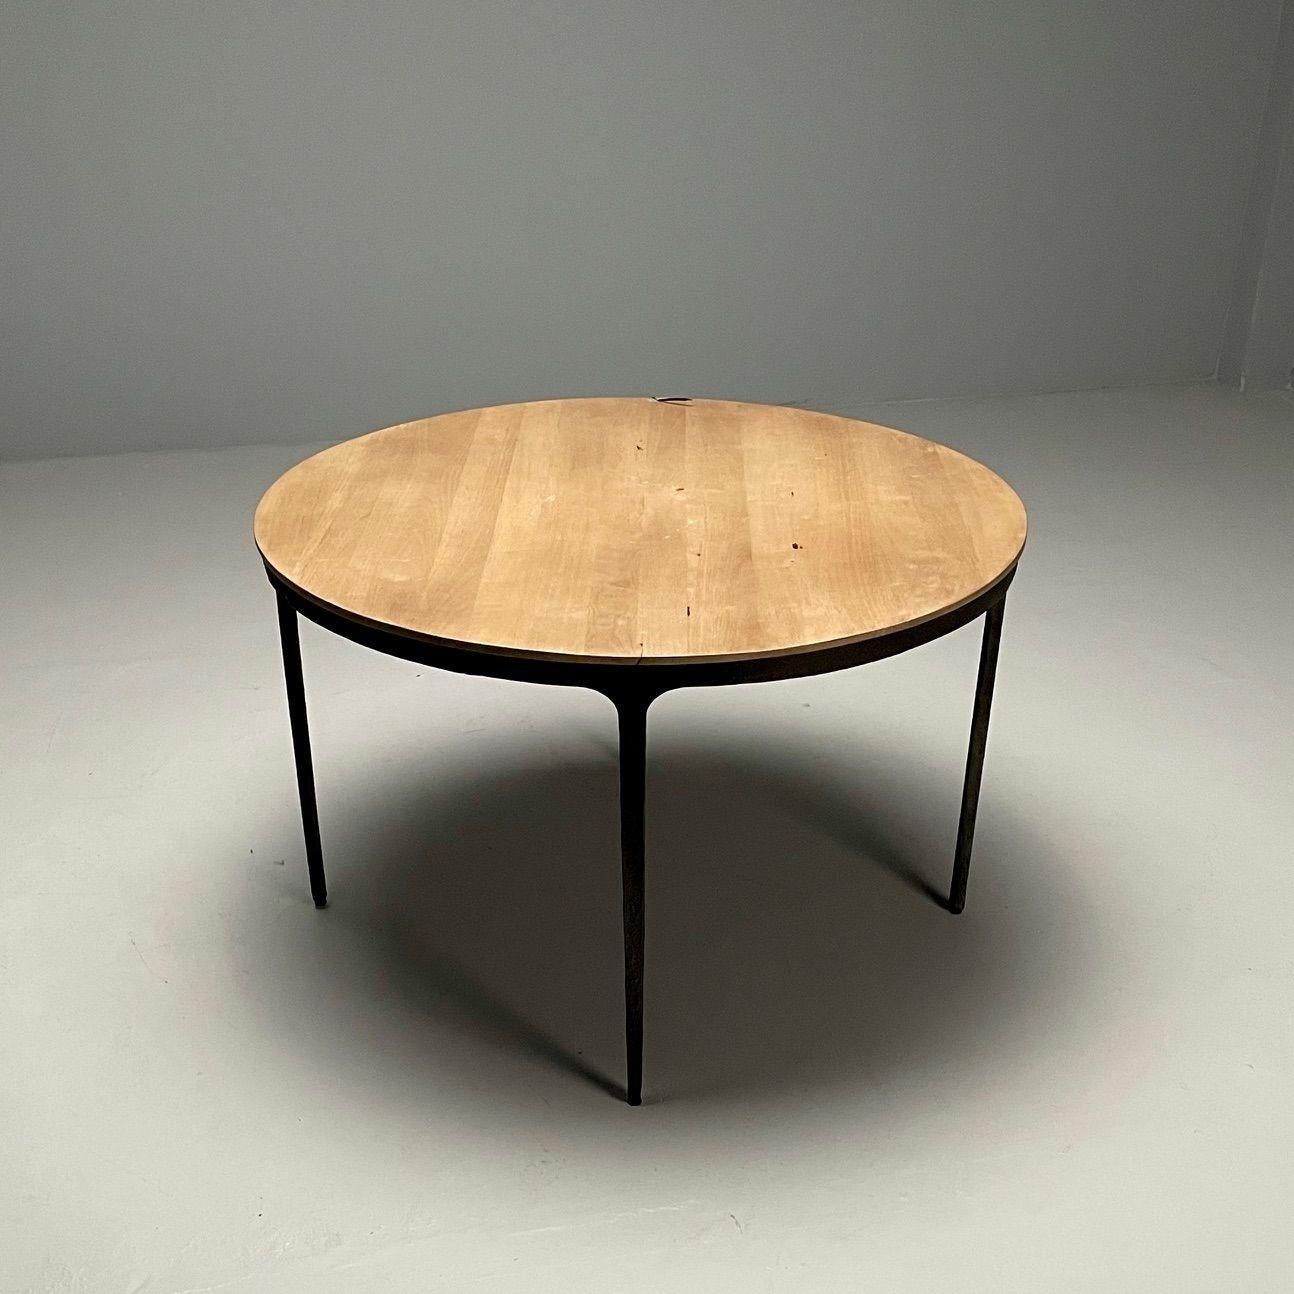 Contemporary, Paul Evans Style, Brutalist, Round Center Table, Elm, Metal

A very sleek and fitting with the times Center or Dining Table in the manner of Paul Evans having a brutalist metal base of rustic form supporting a large round table top of